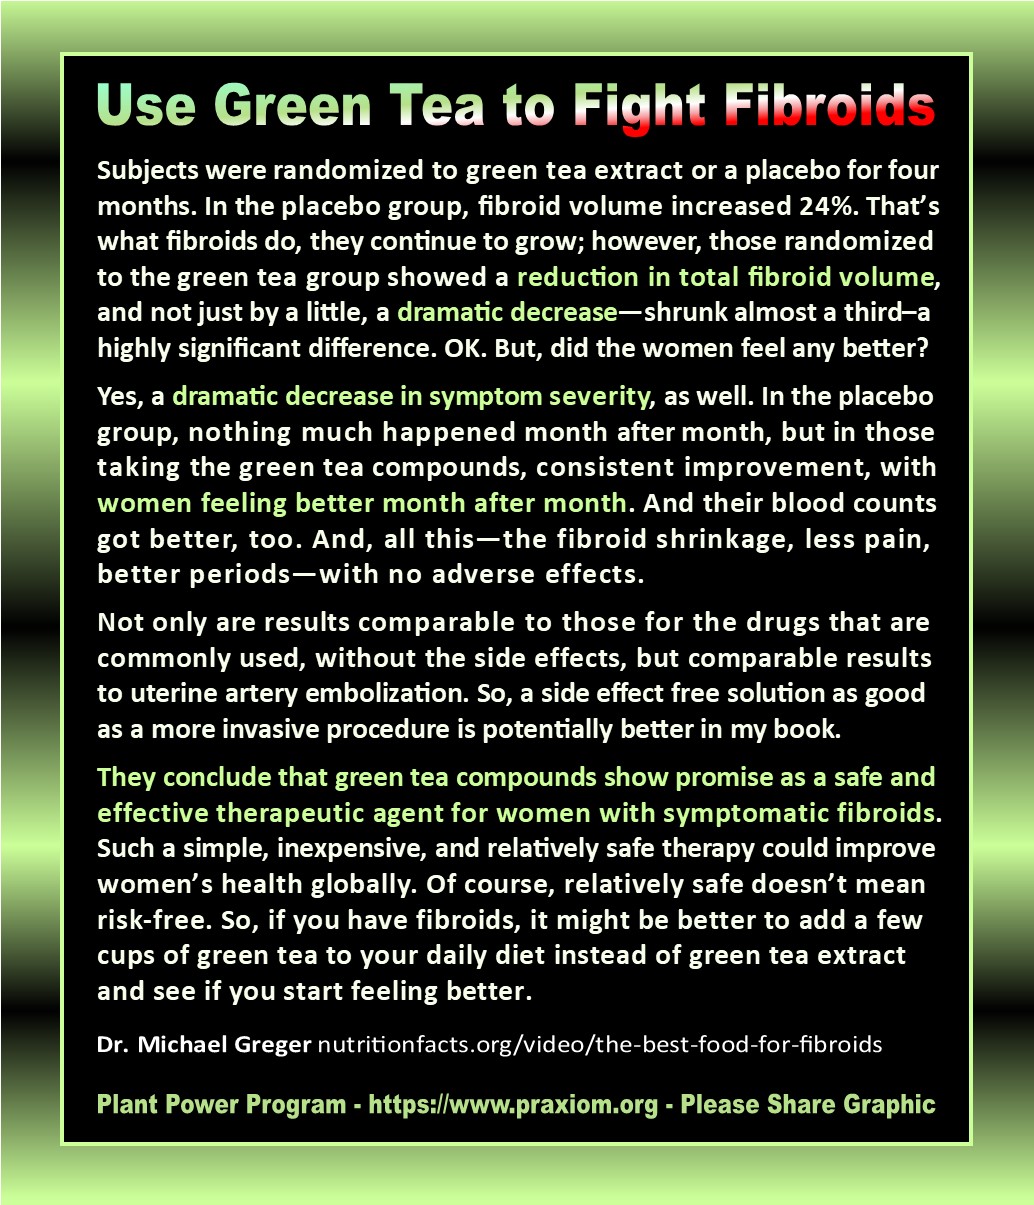 Use Green Tea to Fight Fibrosis - Dr. Michael Greger